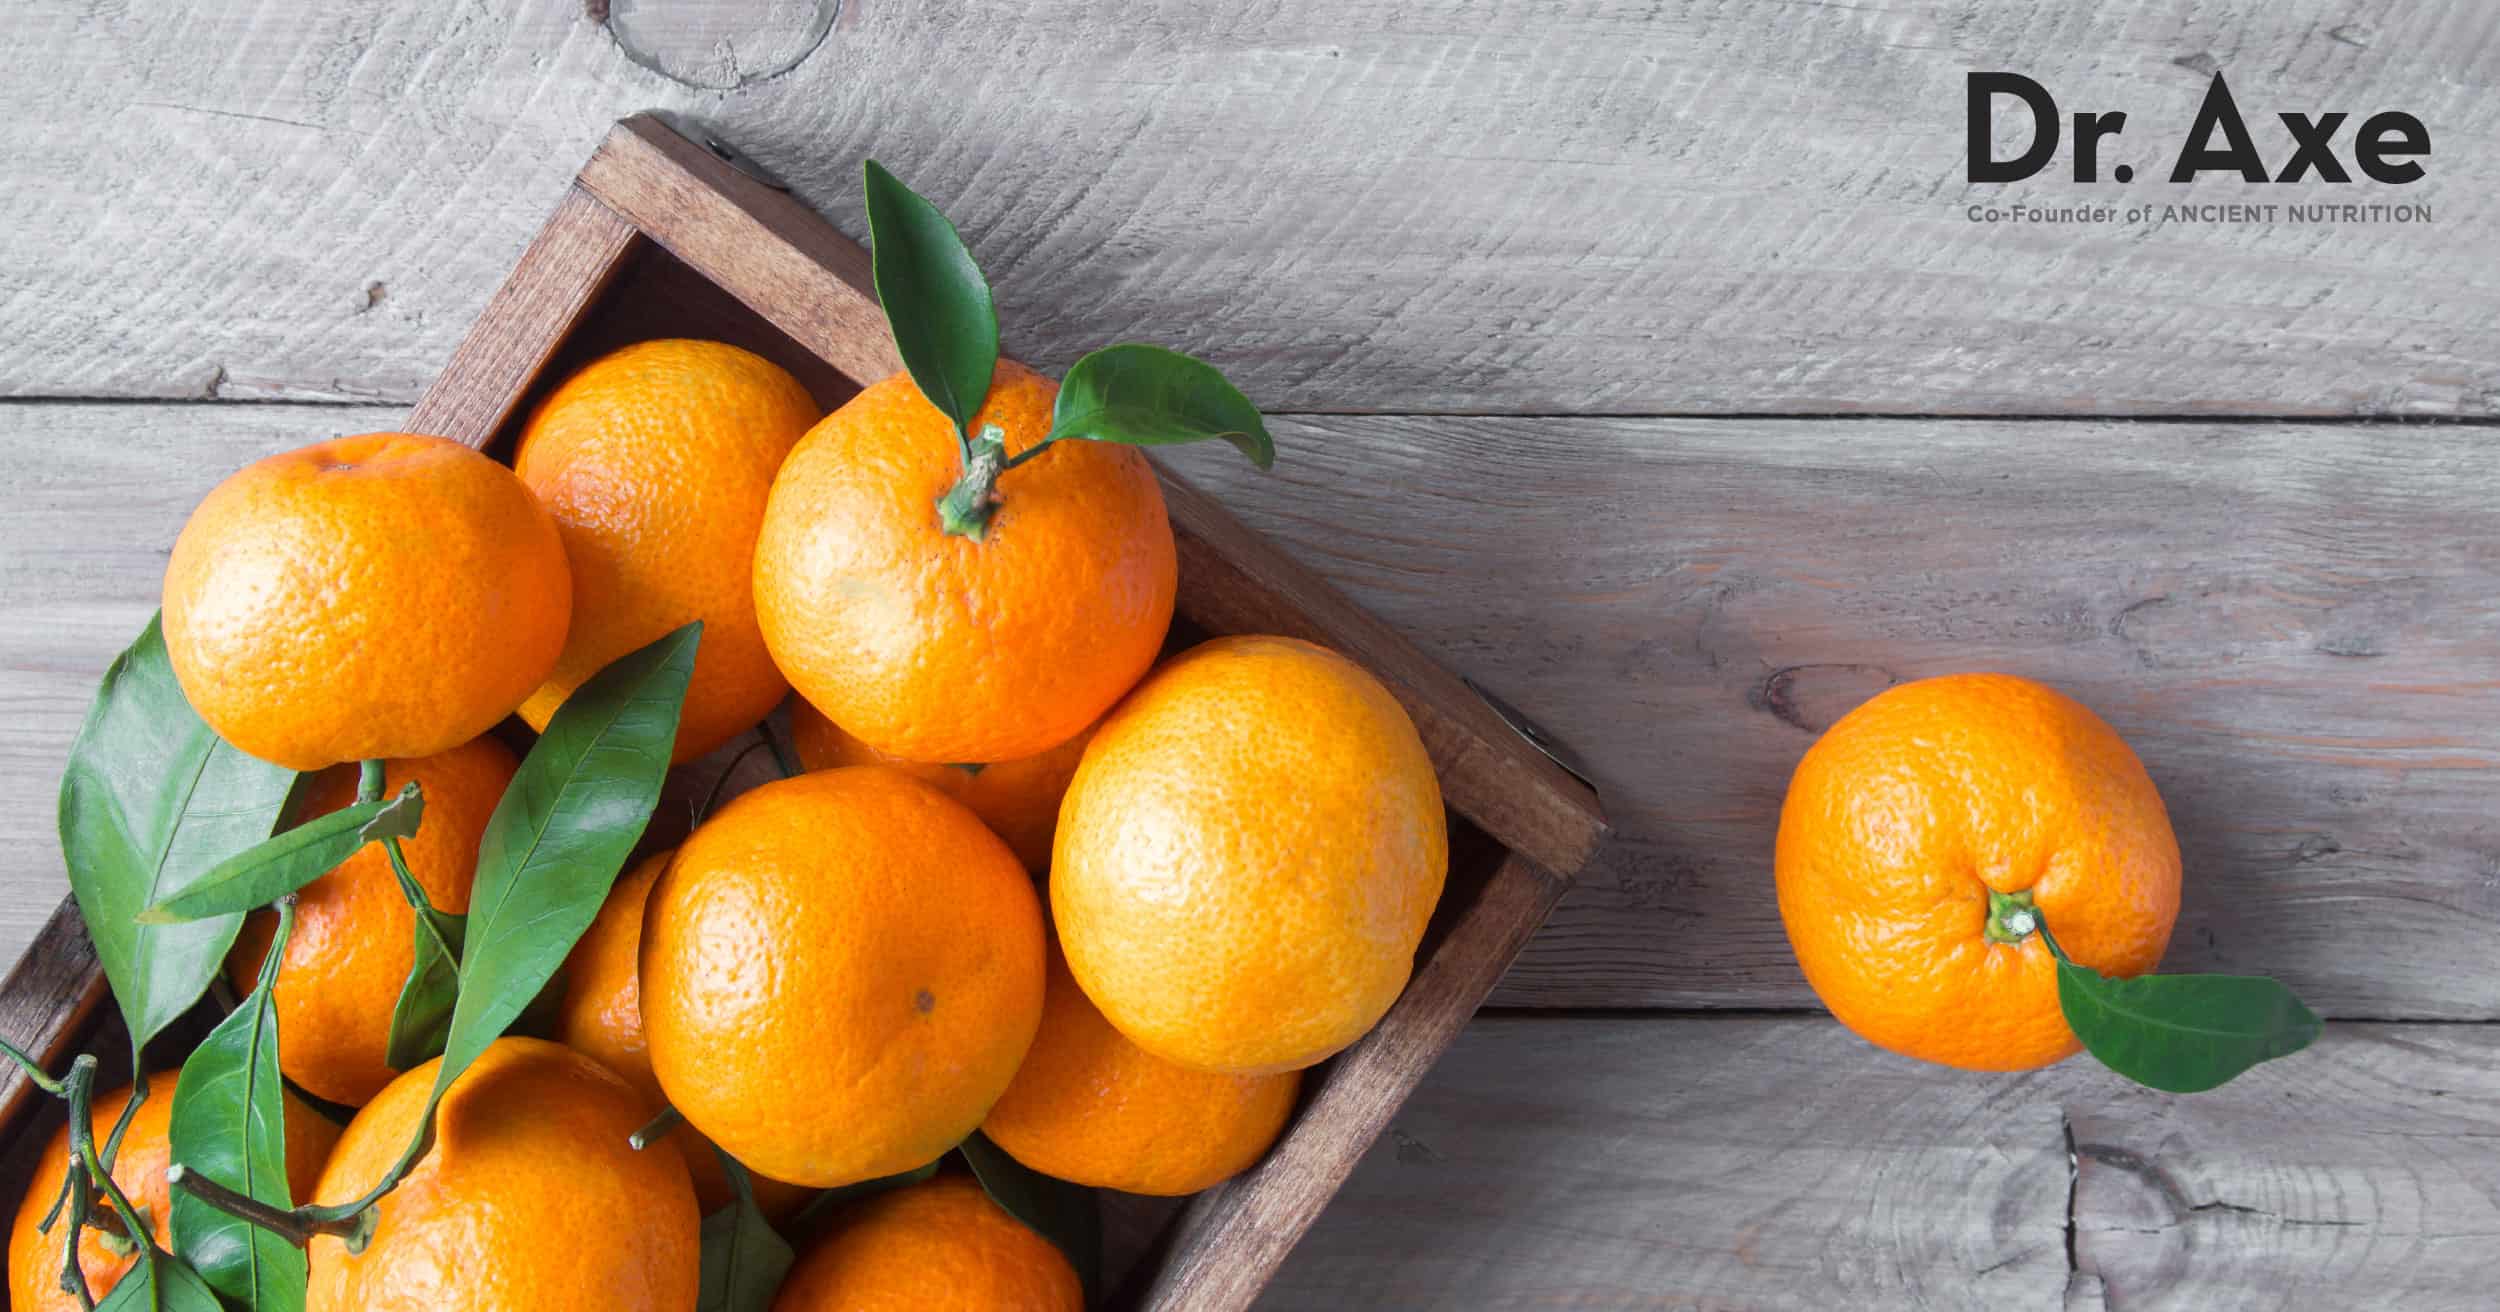 What Are Clementines? Benefits, Nutrition, Recipes, More - Dr. Axe